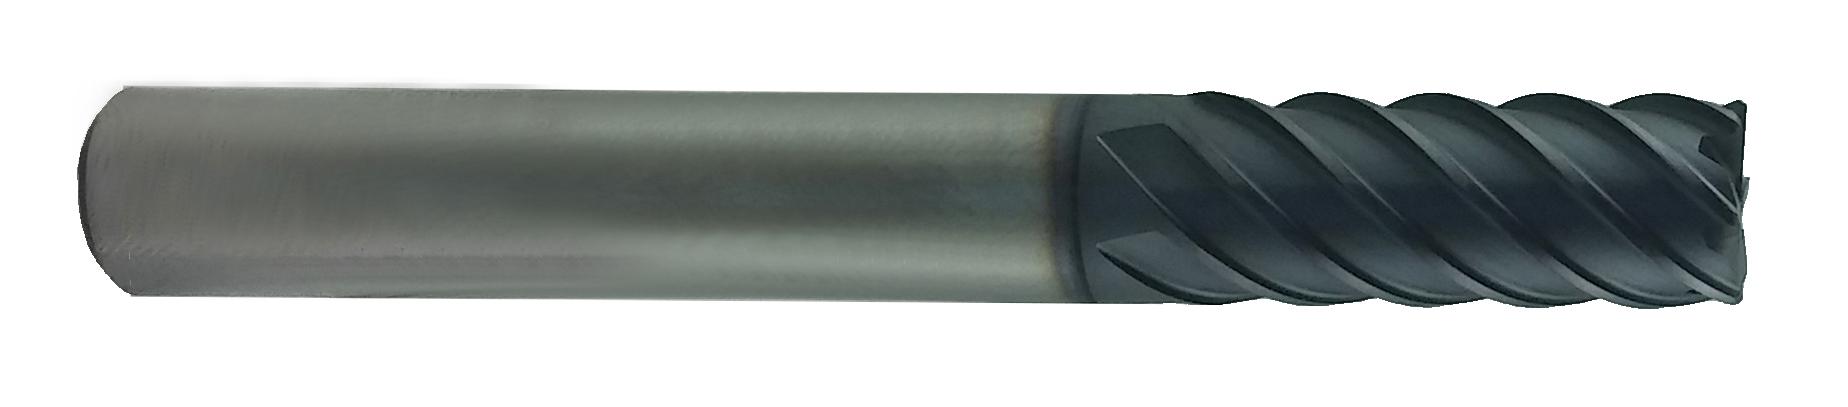 Alfa Tools DEC66864AL 3/32X1/8 4 Flute Double End Center Cutting AlTiN Carbide End Mill Made In USA,